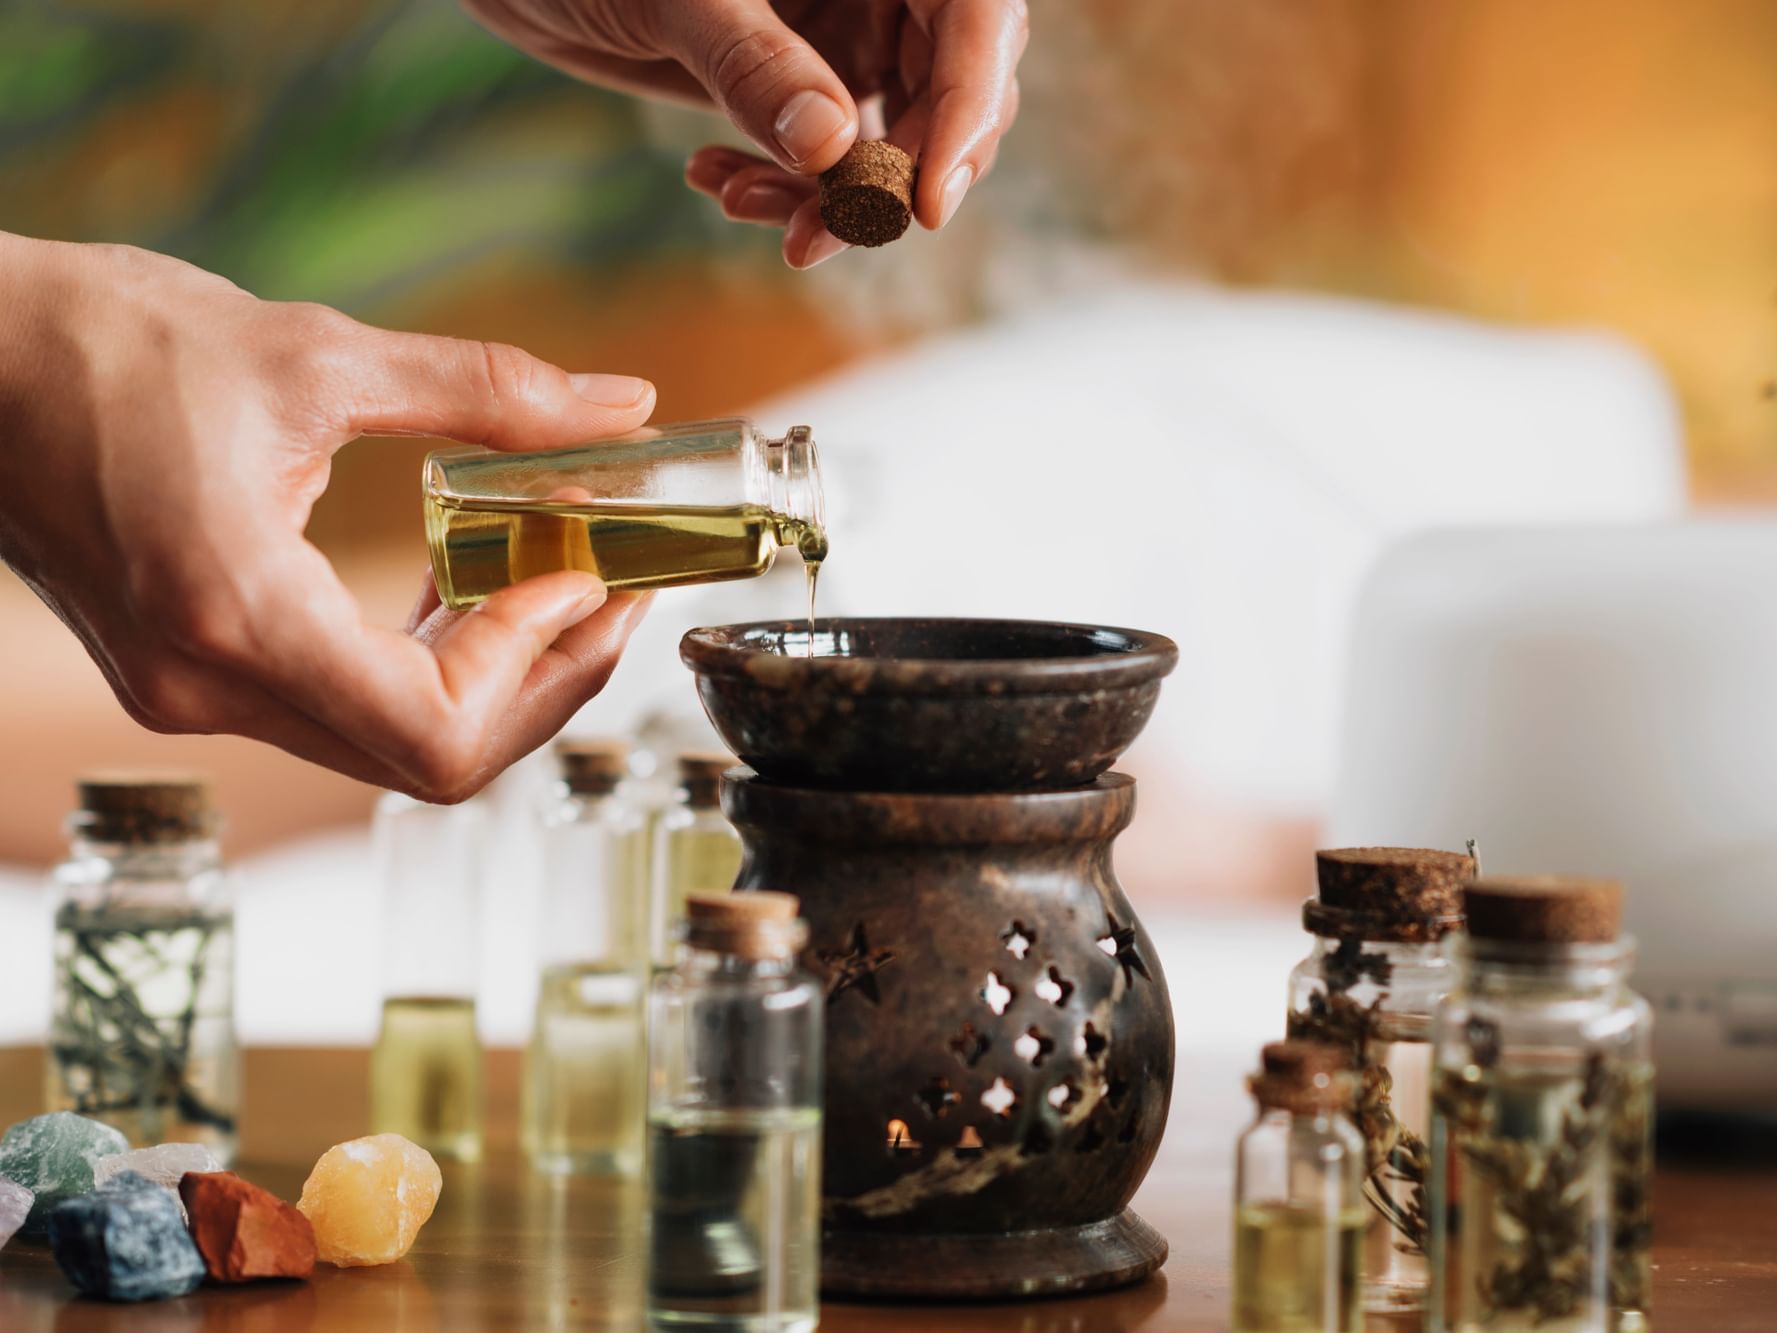 Spa products and herbal oils in Aramsa Spa at Paradox Singapore